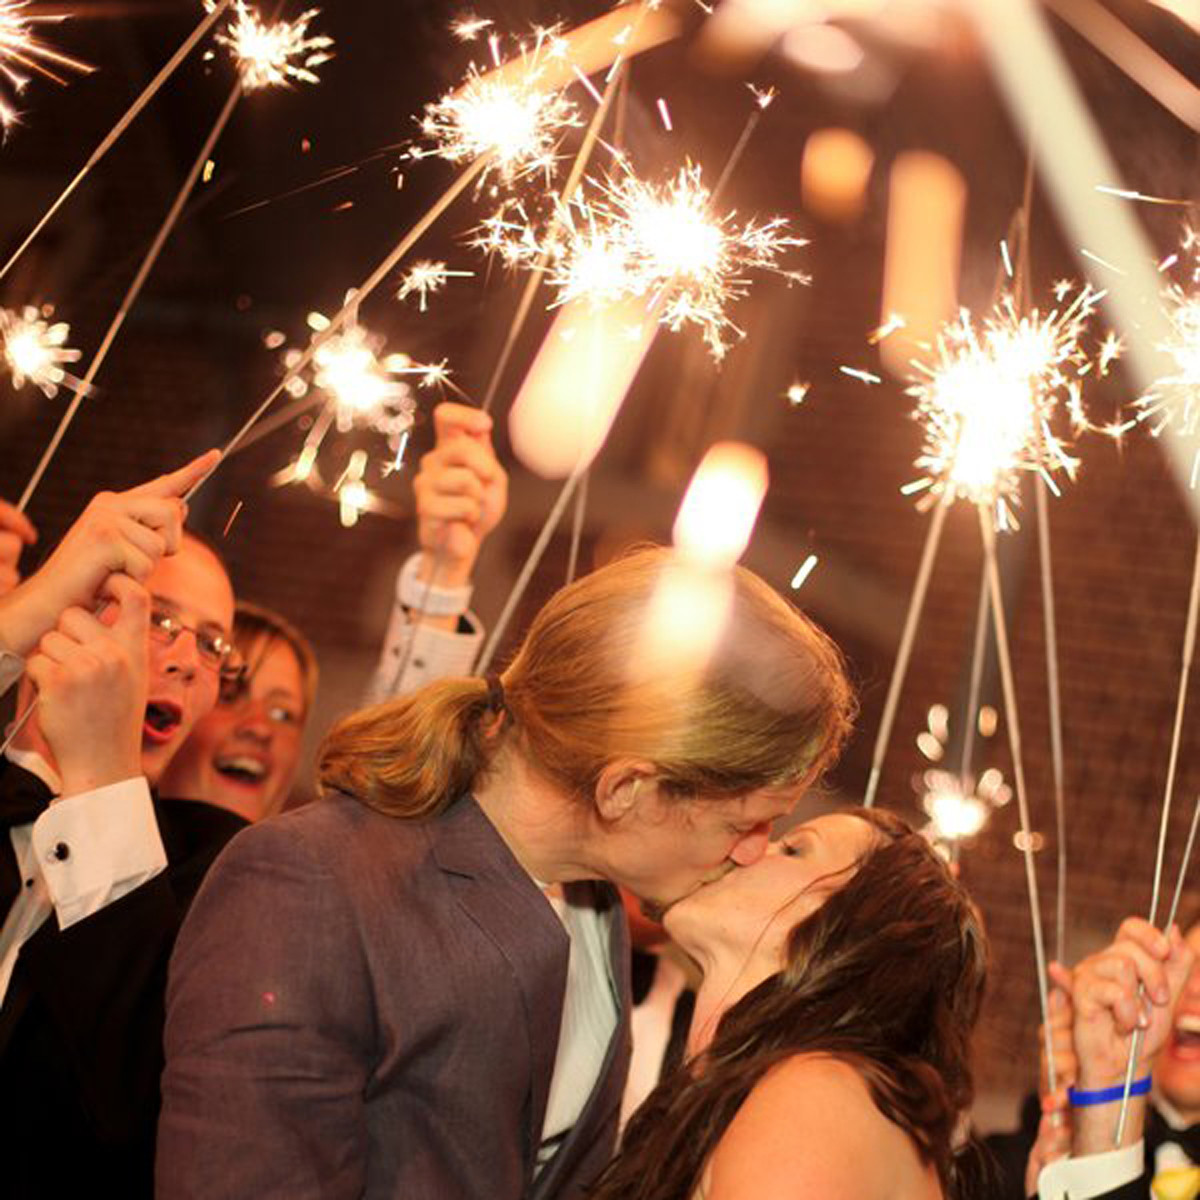 36 Inch Wedding Sparklers Wholesale
 36 Showtime Wedding Sparklers 48 pk Wedding Sparklers USA